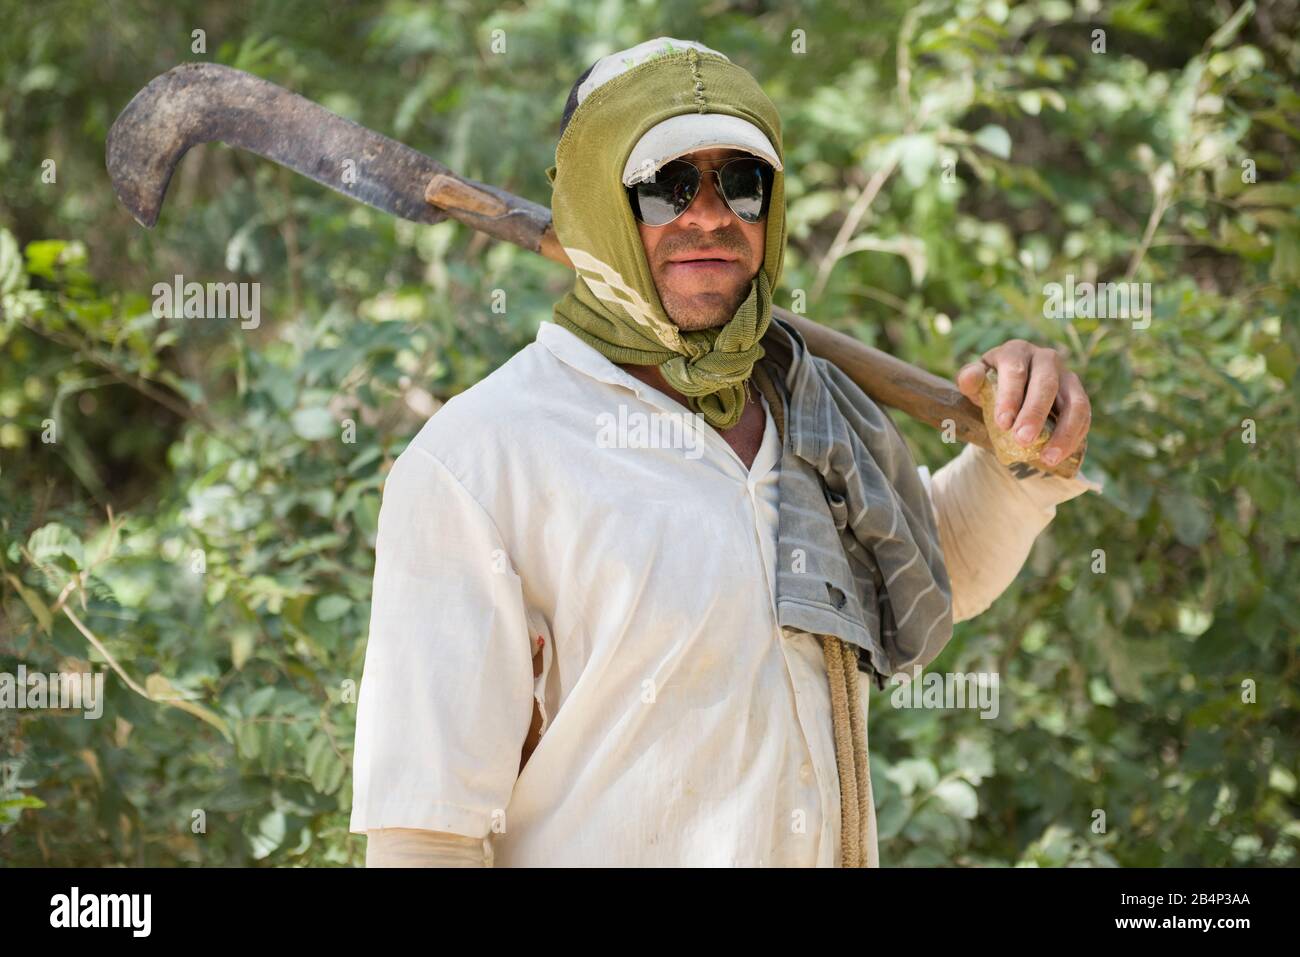 Crato, Ceará, Brazil - June 04, 2016:  Seasonal farm worker in the nature, fully covered with clothes Stock Photo